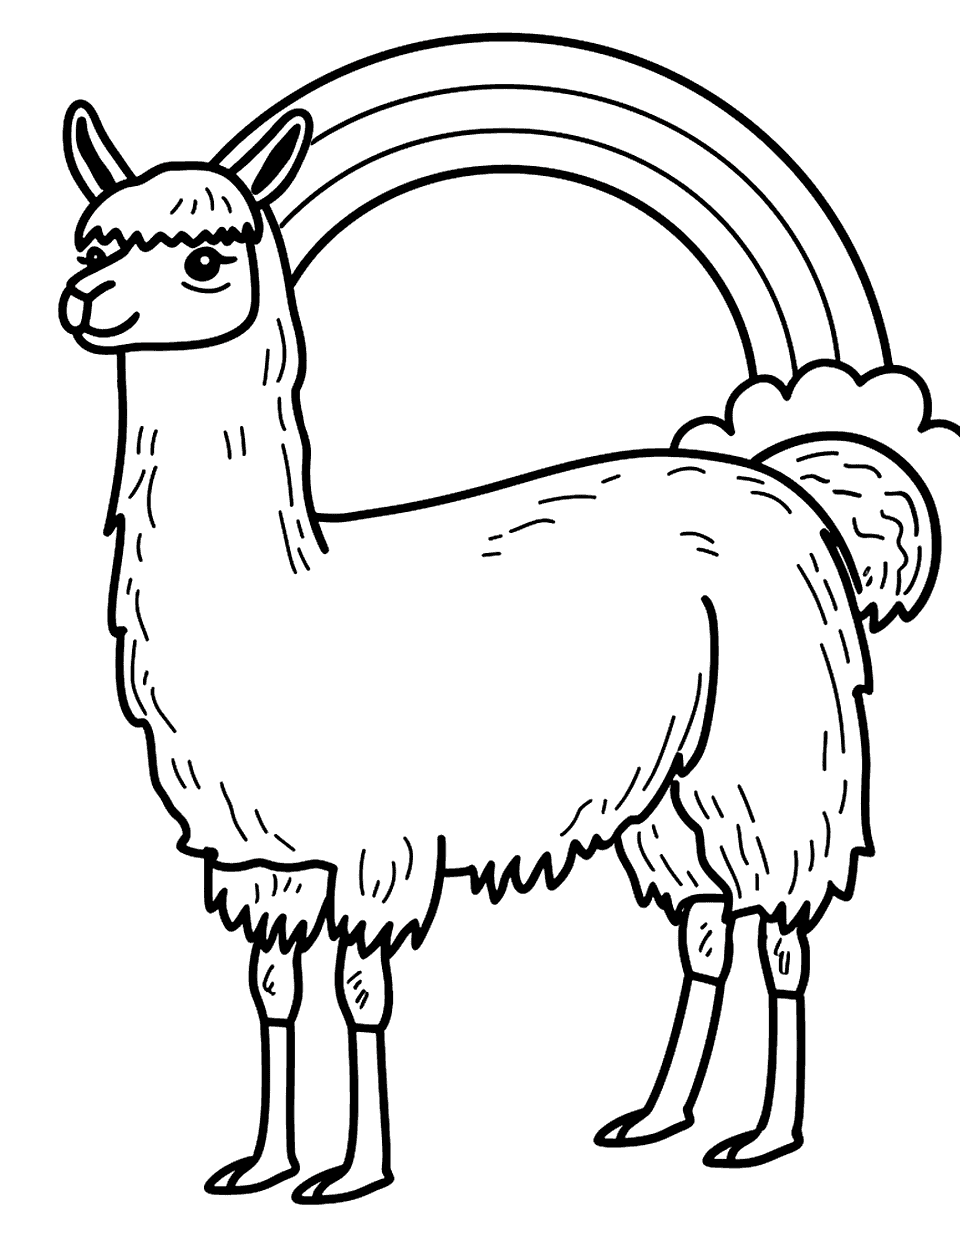 Llama and a Rainbow Coloring Page - A llama standing under a rainbow.